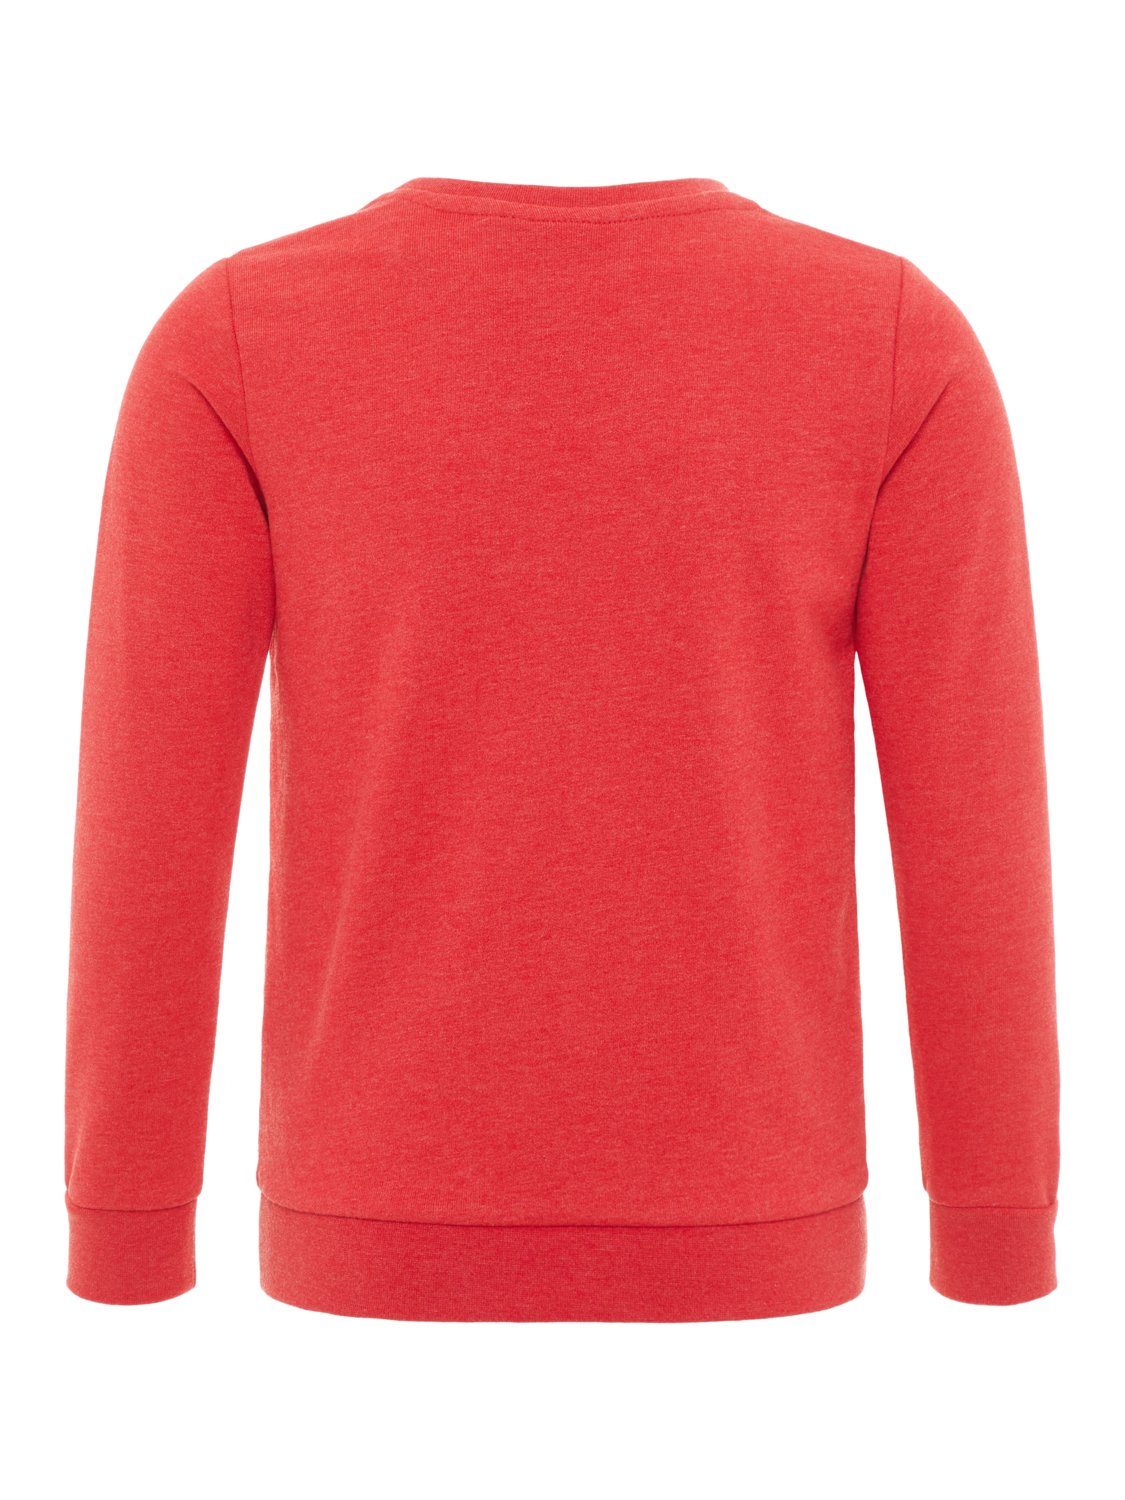 Crew-Neck-Style It Name Name Mädchen in rot It Pullover Rundhalspullover